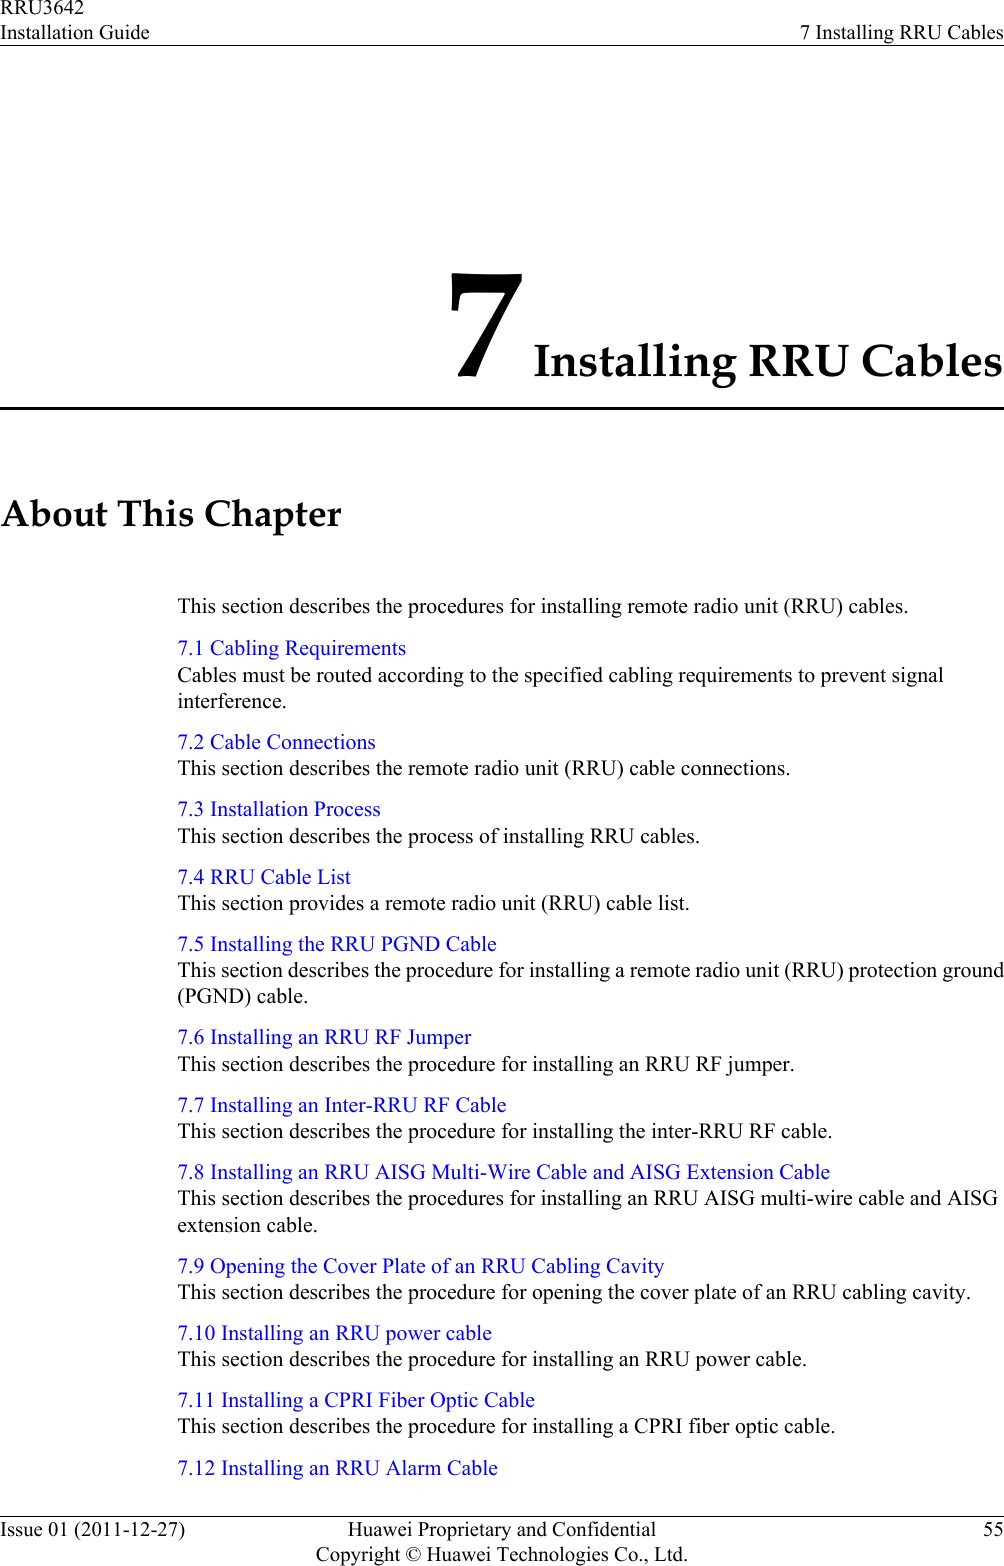 7 Installing RRU CablesAbout This ChapterThis section describes the procedures for installing remote radio unit (RRU) cables.7.1 Cabling RequirementsCables must be routed according to the specified cabling requirements to prevent signalinterference.7.2 Cable ConnectionsThis section describes the remote radio unit (RRU) cable connections.7.3 Installation ProcessThis section describes the process of installing RRU cables.7.4 RRU Cable ListThis section provides a remote radio unit (RRU) cable list.7.5 Installing the RRU PGND CableThis section describes the procedure for installing a remote radio unit (RRU) protection ground(PGND) cable.7.6 Installing an RRU RF JumperThis section describes the procedure for installing an RRU RF jumper.7.7 Installing an Inter-RRU RF CableThis section describes the procedure for installing the inter-RRU RF cable.7.8 Installing an RRU AISG Multi-Wire Cable and AISG Extension CableThis section describes the procedures for installing an RRU AISG multi-wire cable and AISGextension cable.7.9 Opening the Cover Plate of an RRU Cabling CavityThis section describes the procedure for opening the cover plate of an RRU cabling cavity.7.10 Installing an RRU power cableThis section describes the procedure for installing an RRU power cable.7.11 Installing a CPRI Fiber Optic CableThis section describes the procedure for installing a CPRI fiber optic cable.7.12 Installing an RRU Alarm CableRRU3642Installation Guide 7 Installing RRU CablesIssue 01 (2011-12-27) Huawei Proprietary and ConfidentialCopyright © Huawei Technologies Co., Ltd.55